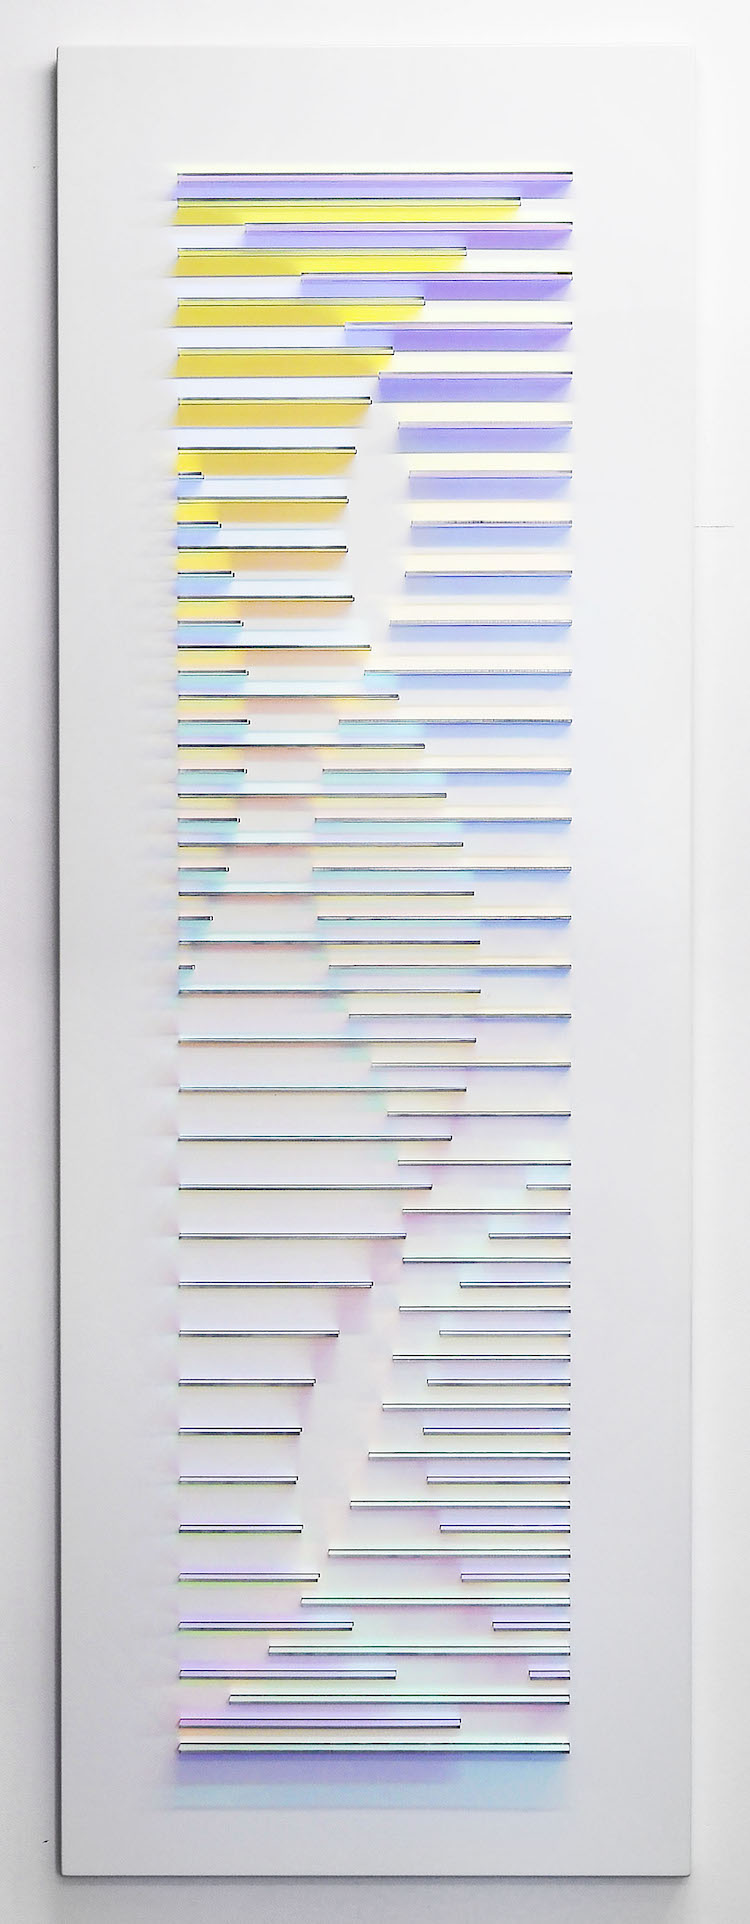 Dichroic Installations by Chris Wood